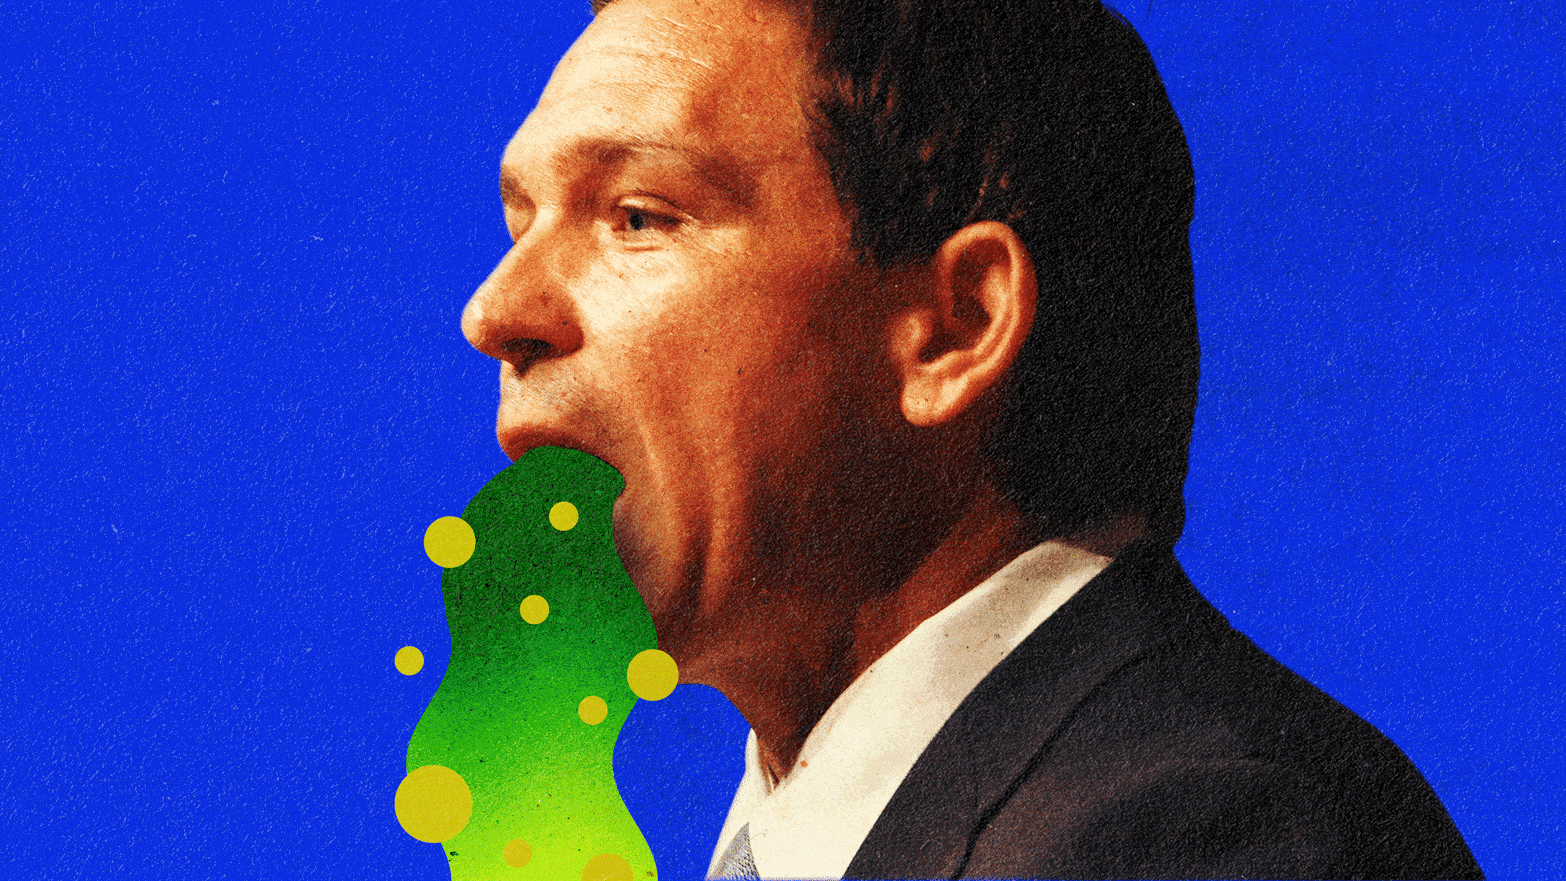 A gif of Florida Governor Ron De Santis throwing up illustrated puke